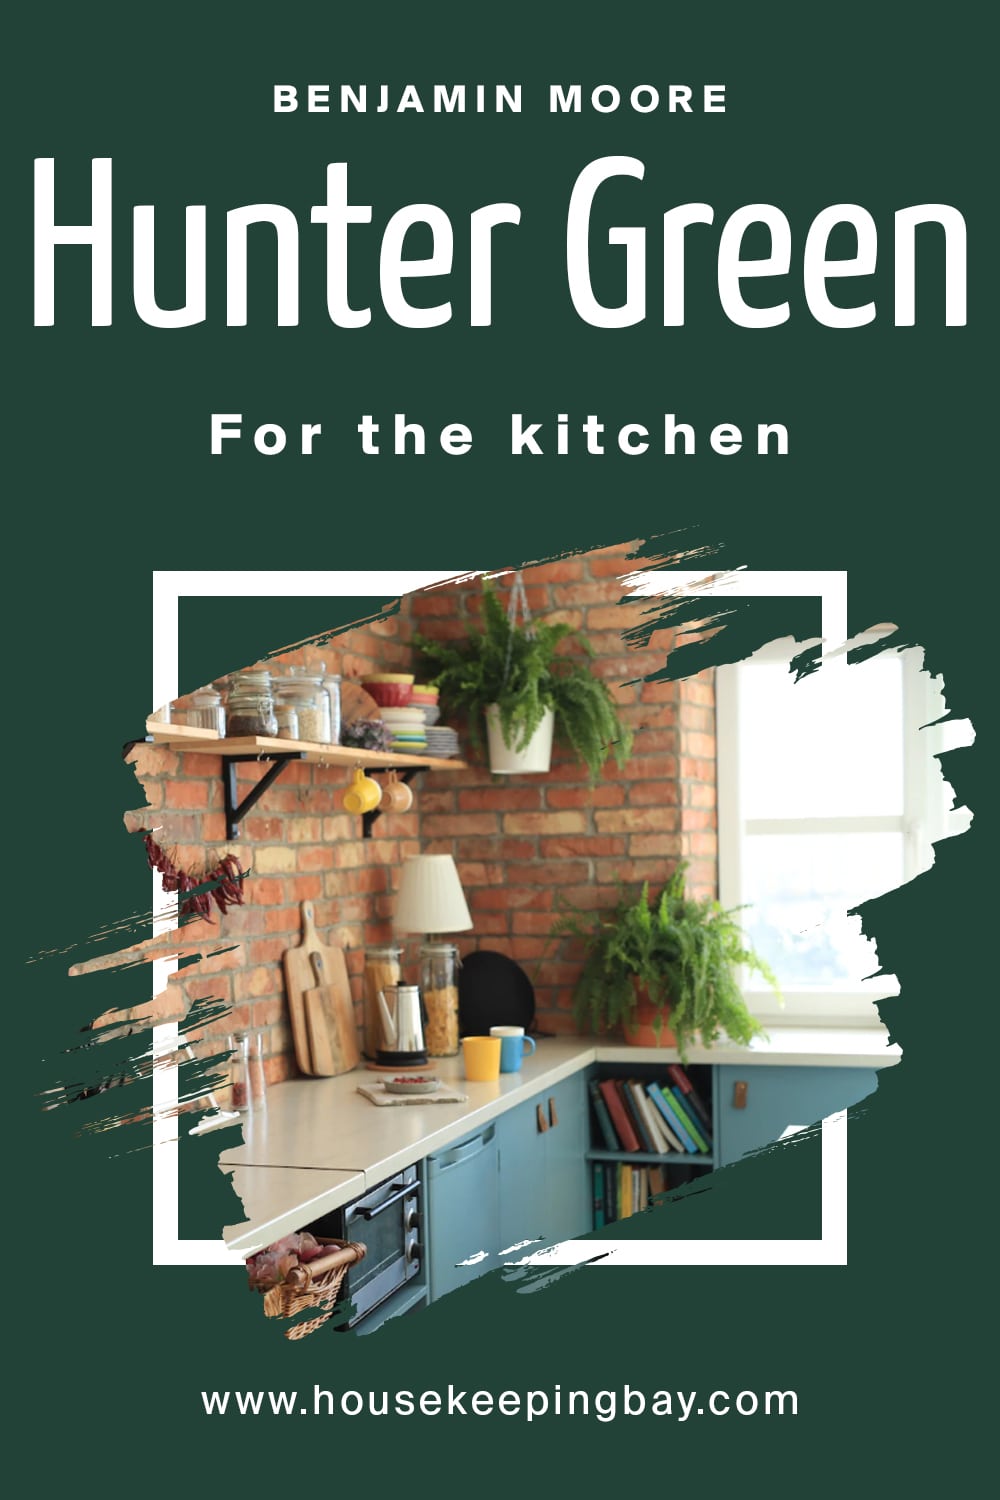 Benjamin Moore. Hunter Green For the kitchen